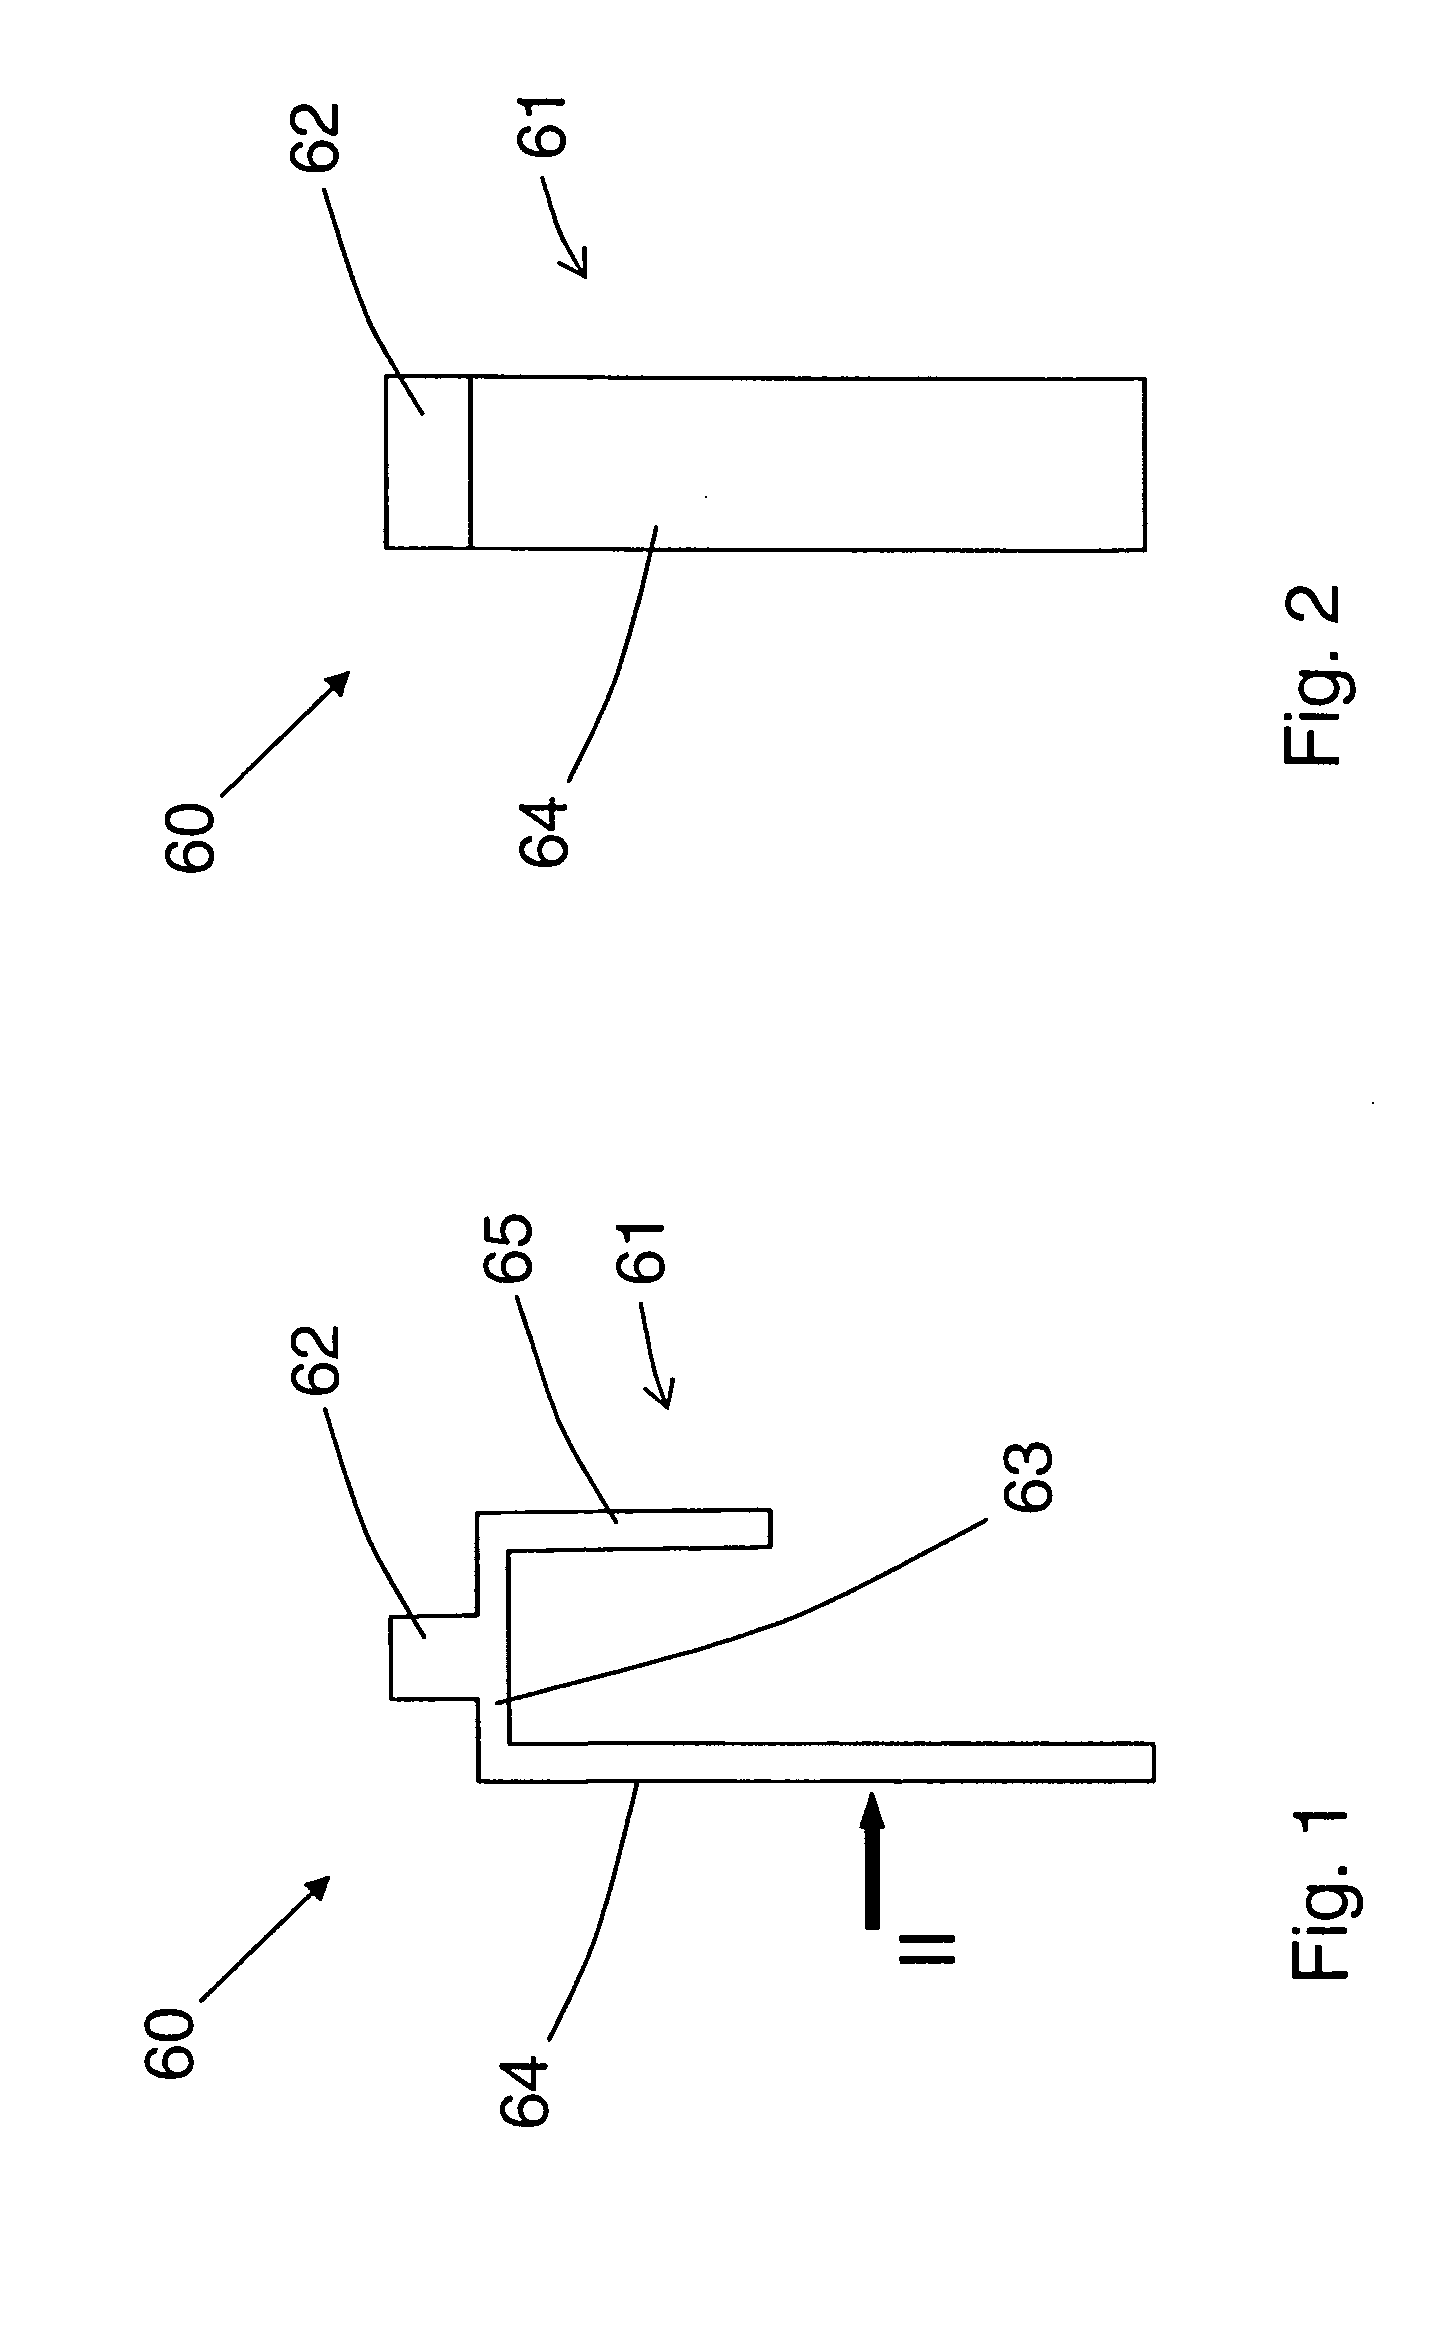 Switching adapter for individual settings with hand-held setting tool